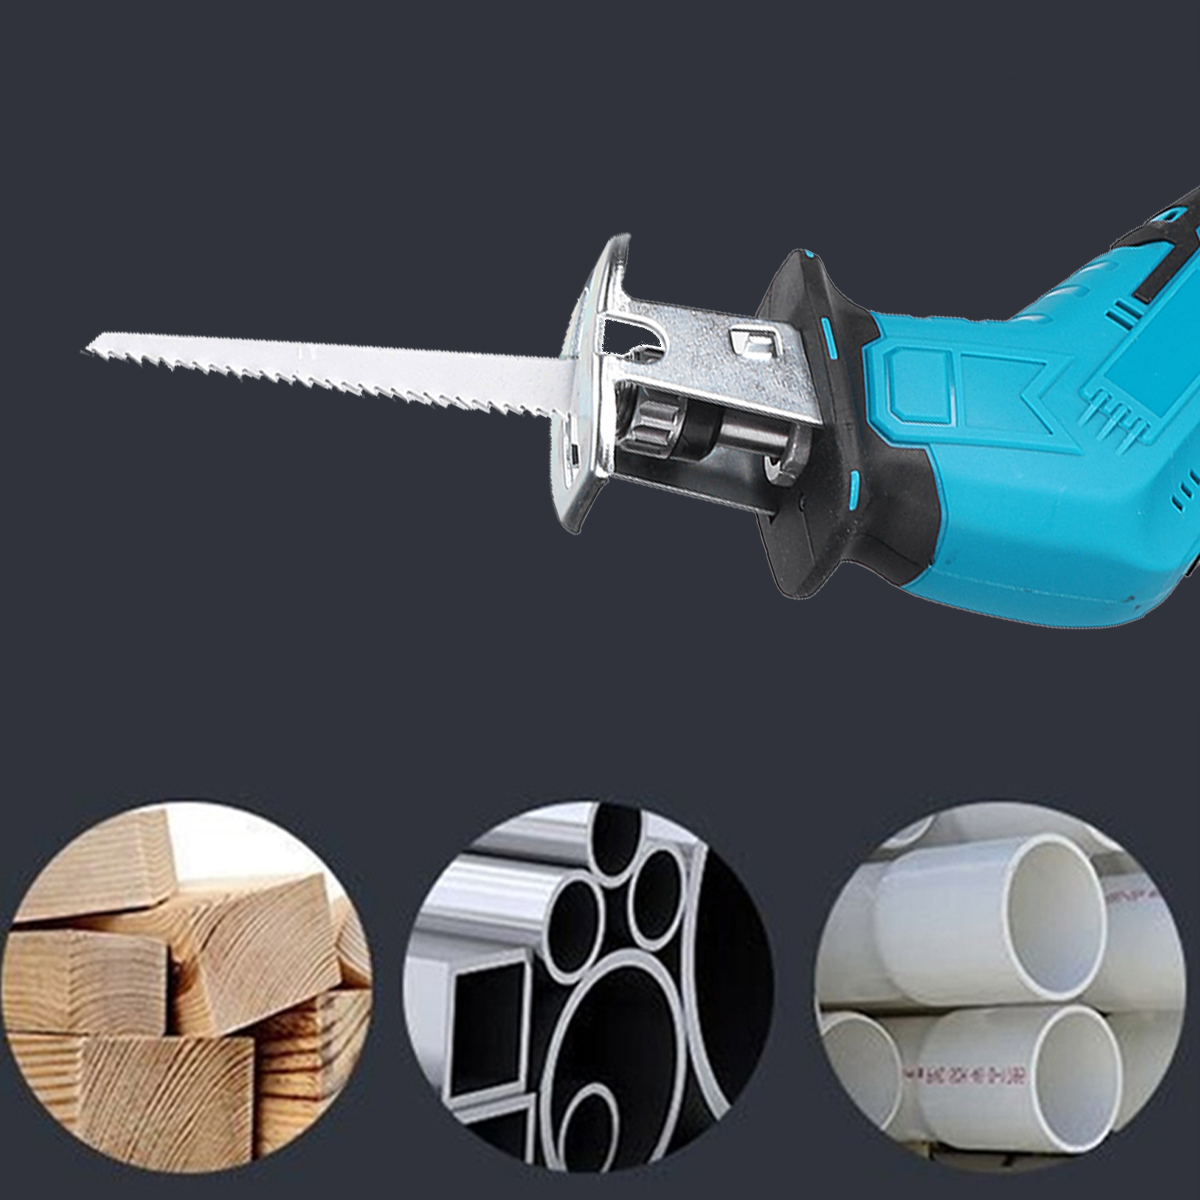 88V-12000mAh-Cordless-Reciprocating-Saw-Adjustable-Speed-Electric-Cutting-Chainsaw-For-Wood-1781939-5